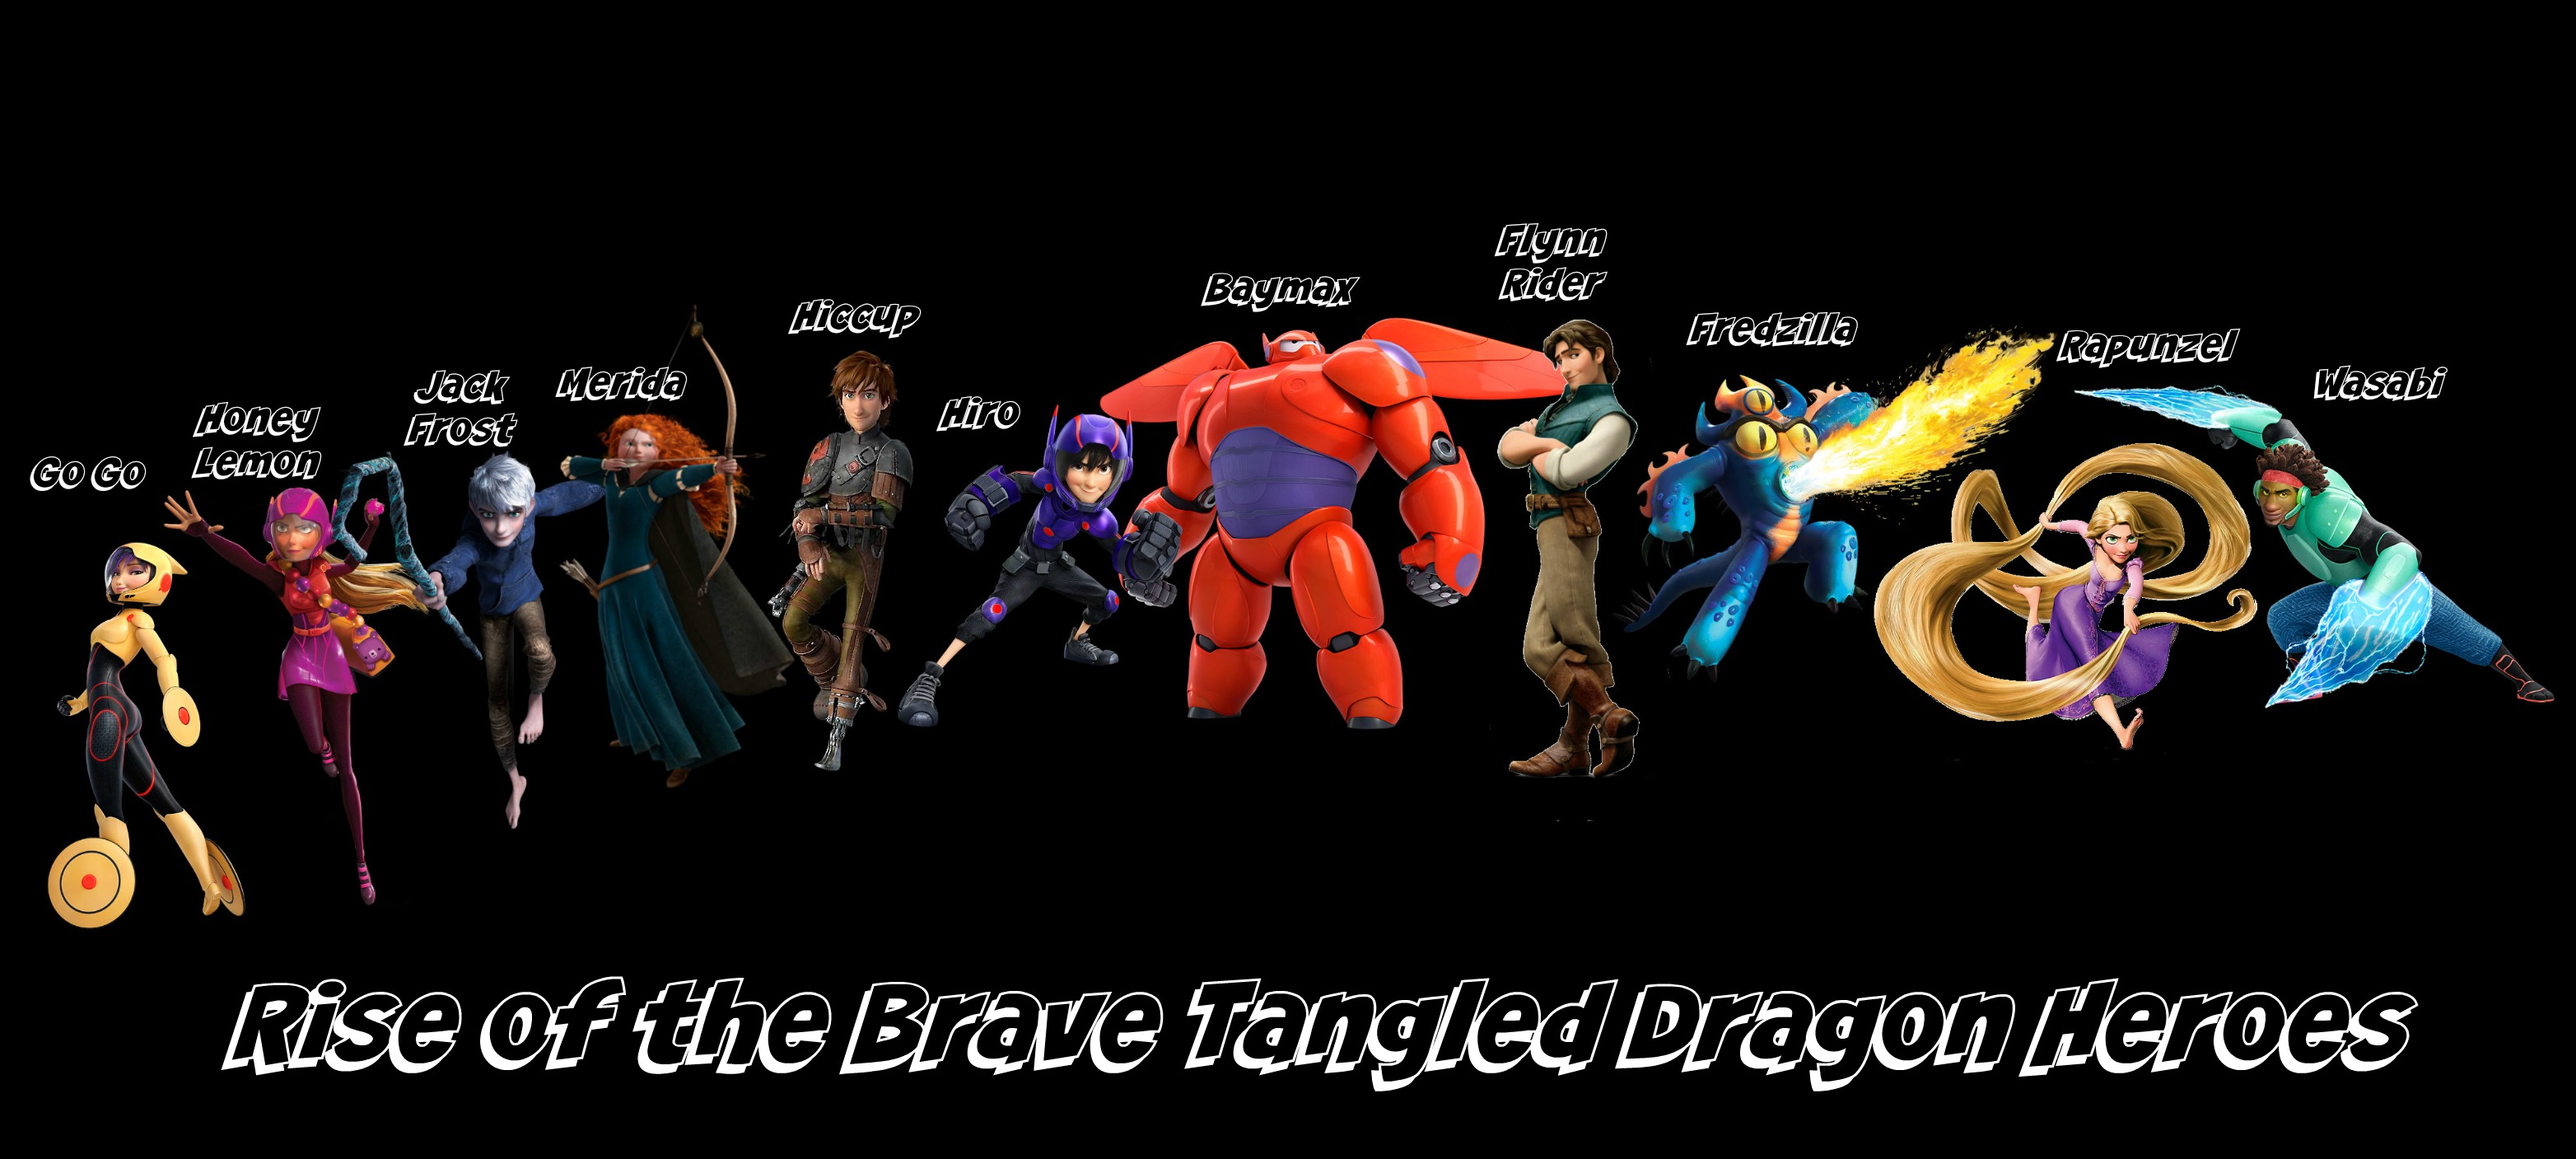 Rise Of The Brave Tangled Dragon Heroes Disney Crossover